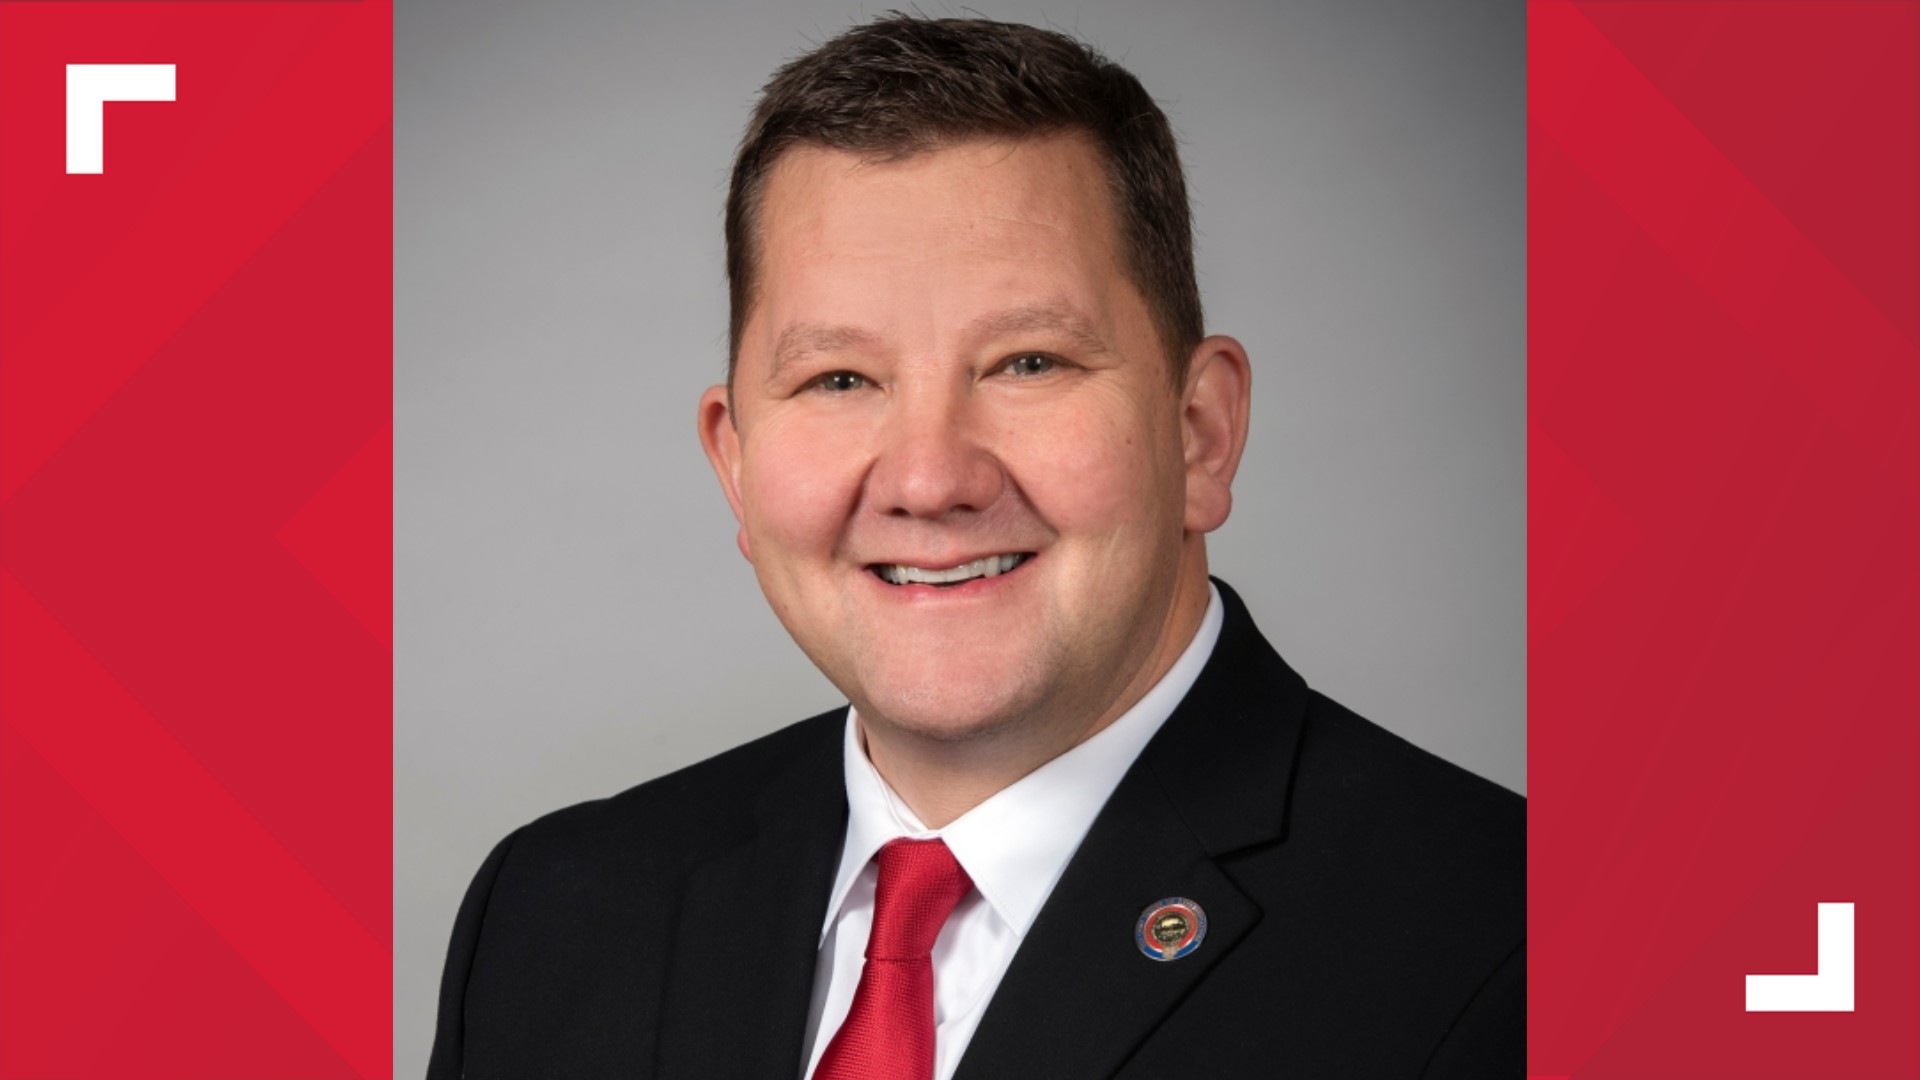 The former Summit County representative was indicted in July 2023 on domestic violence and assault charges.